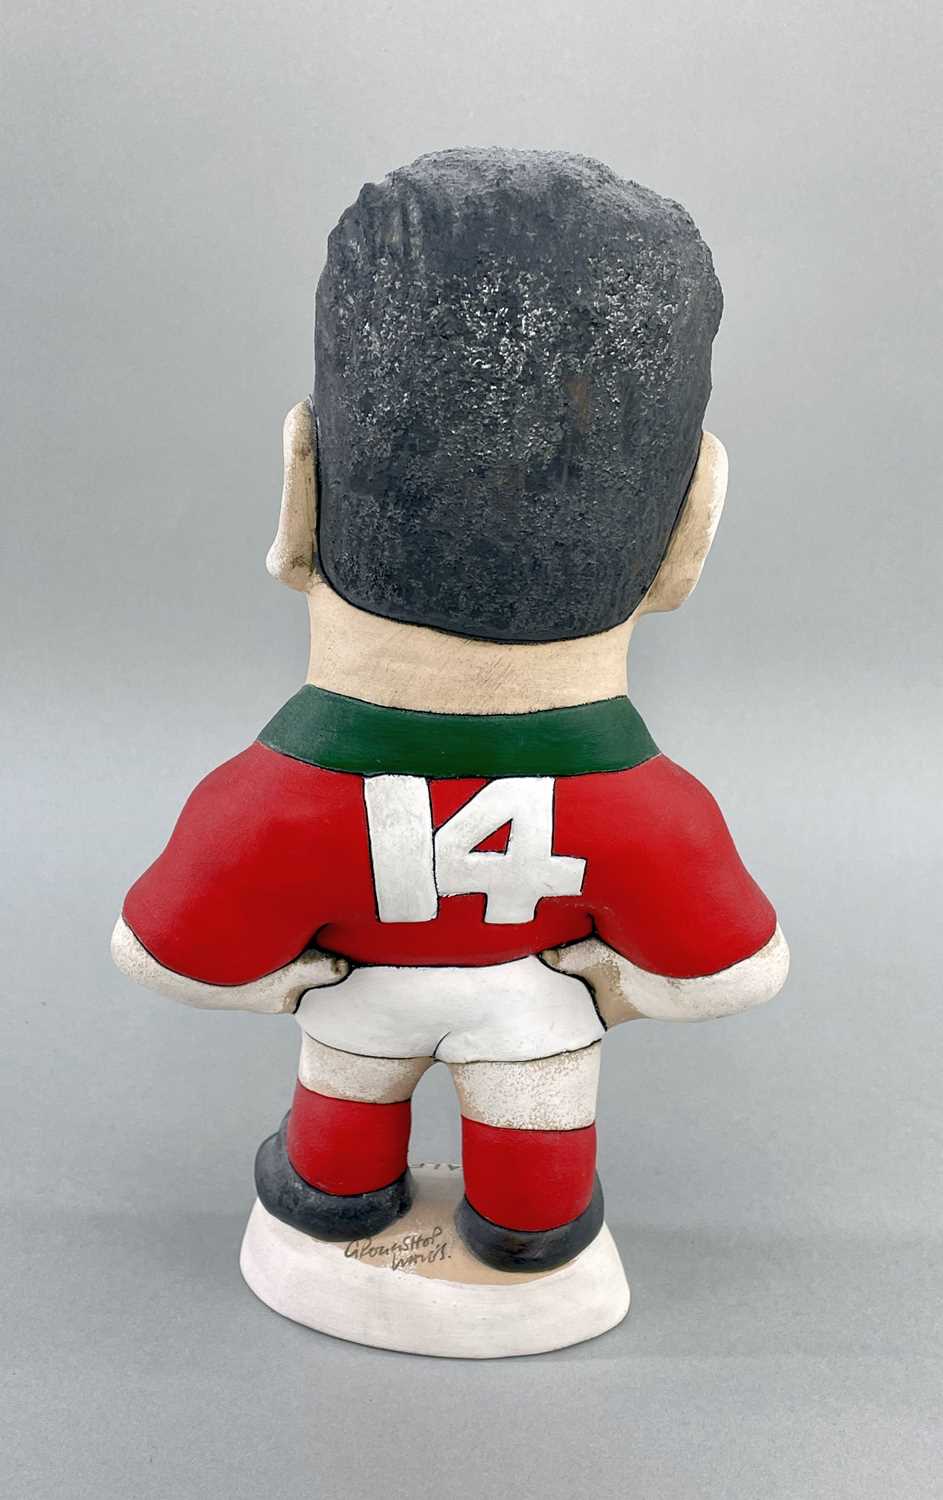 IEUAN EVANS 'GROGG', signed in the clay 'Grogg Shop Wales', 24.5cm h - Image 2 of 2